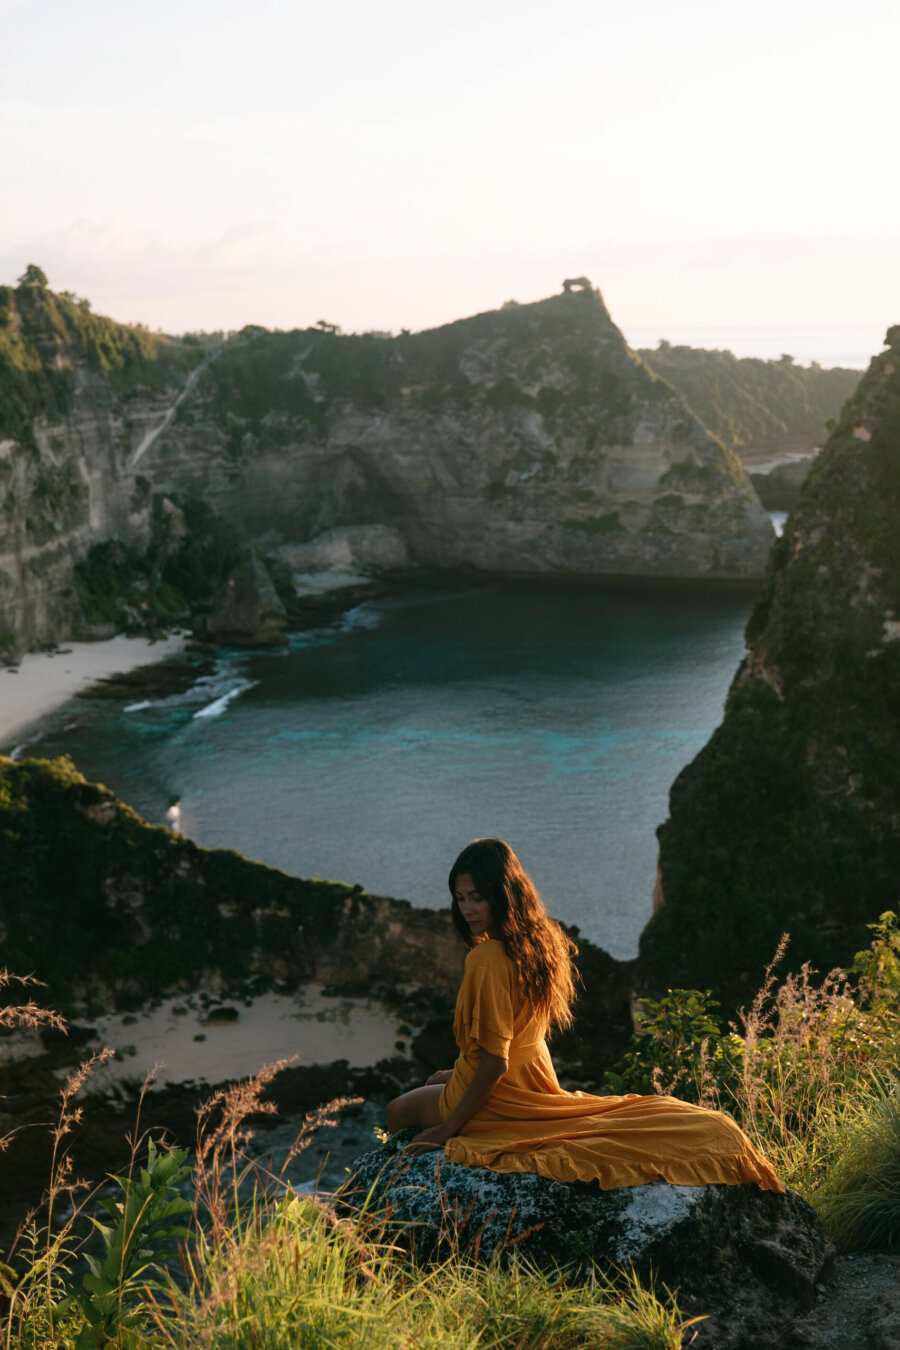 Pili in the viewpoint at the treehouse Molenteng, Nusa Penida